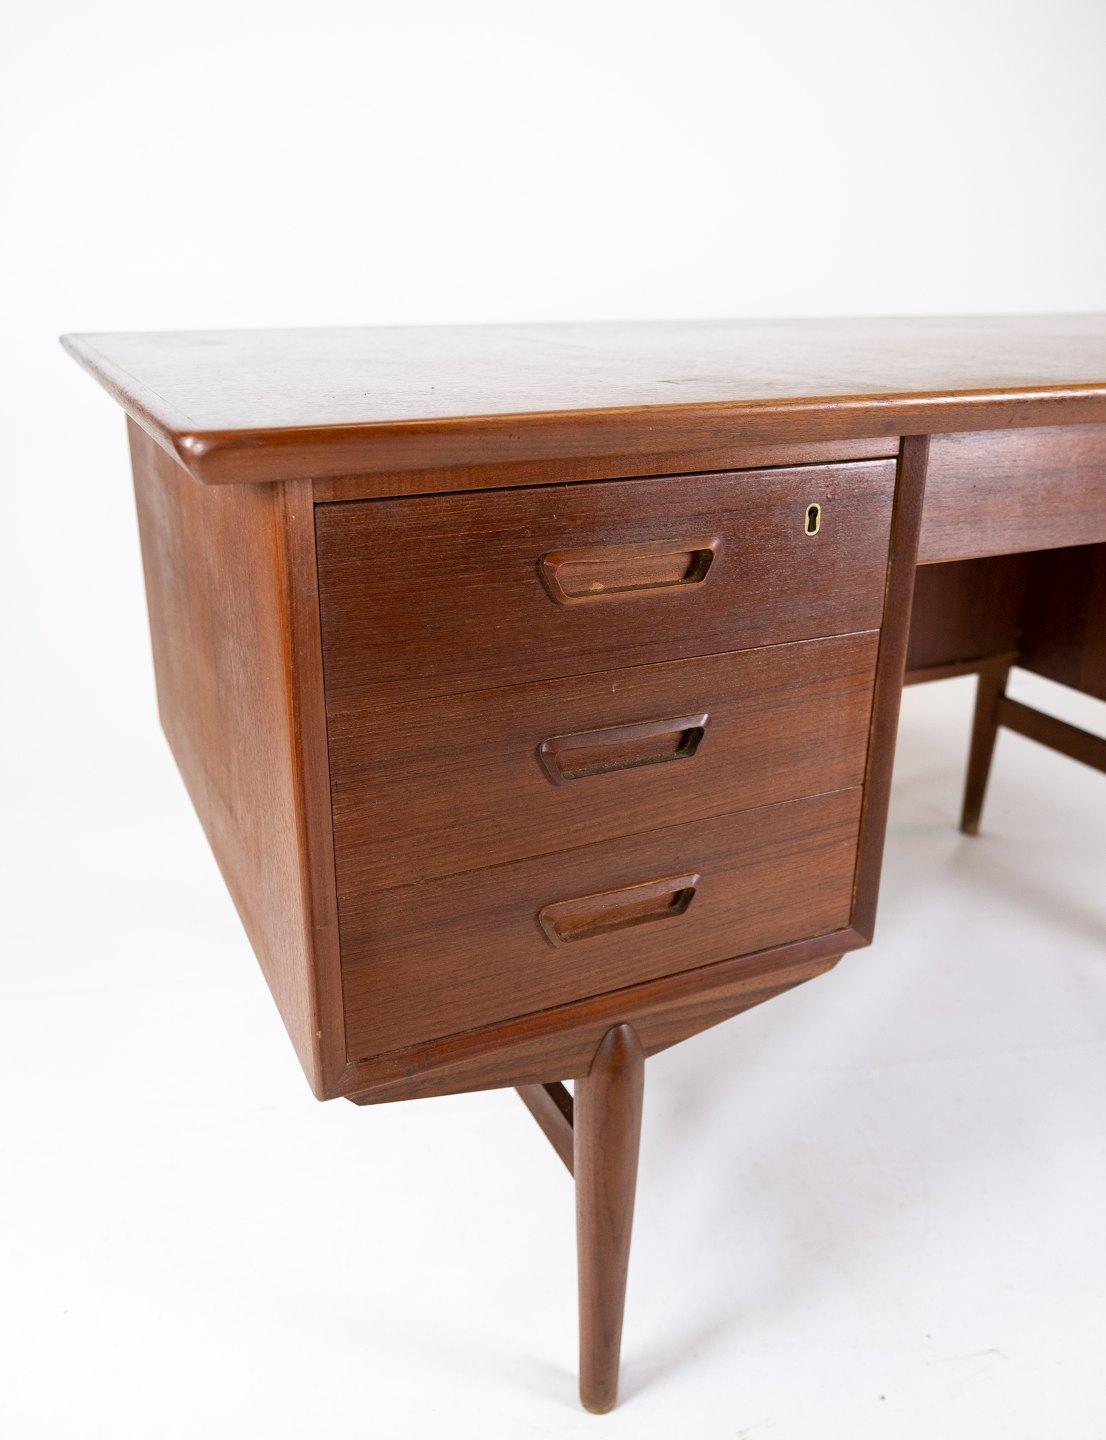 This desk is a splendid example of Danish design from the 1960s and represents the era with its timeless appearance and functionality.

Made of teak wood, the desk exudes a warm and inviting atmosphere that fits perfectly with both modern and